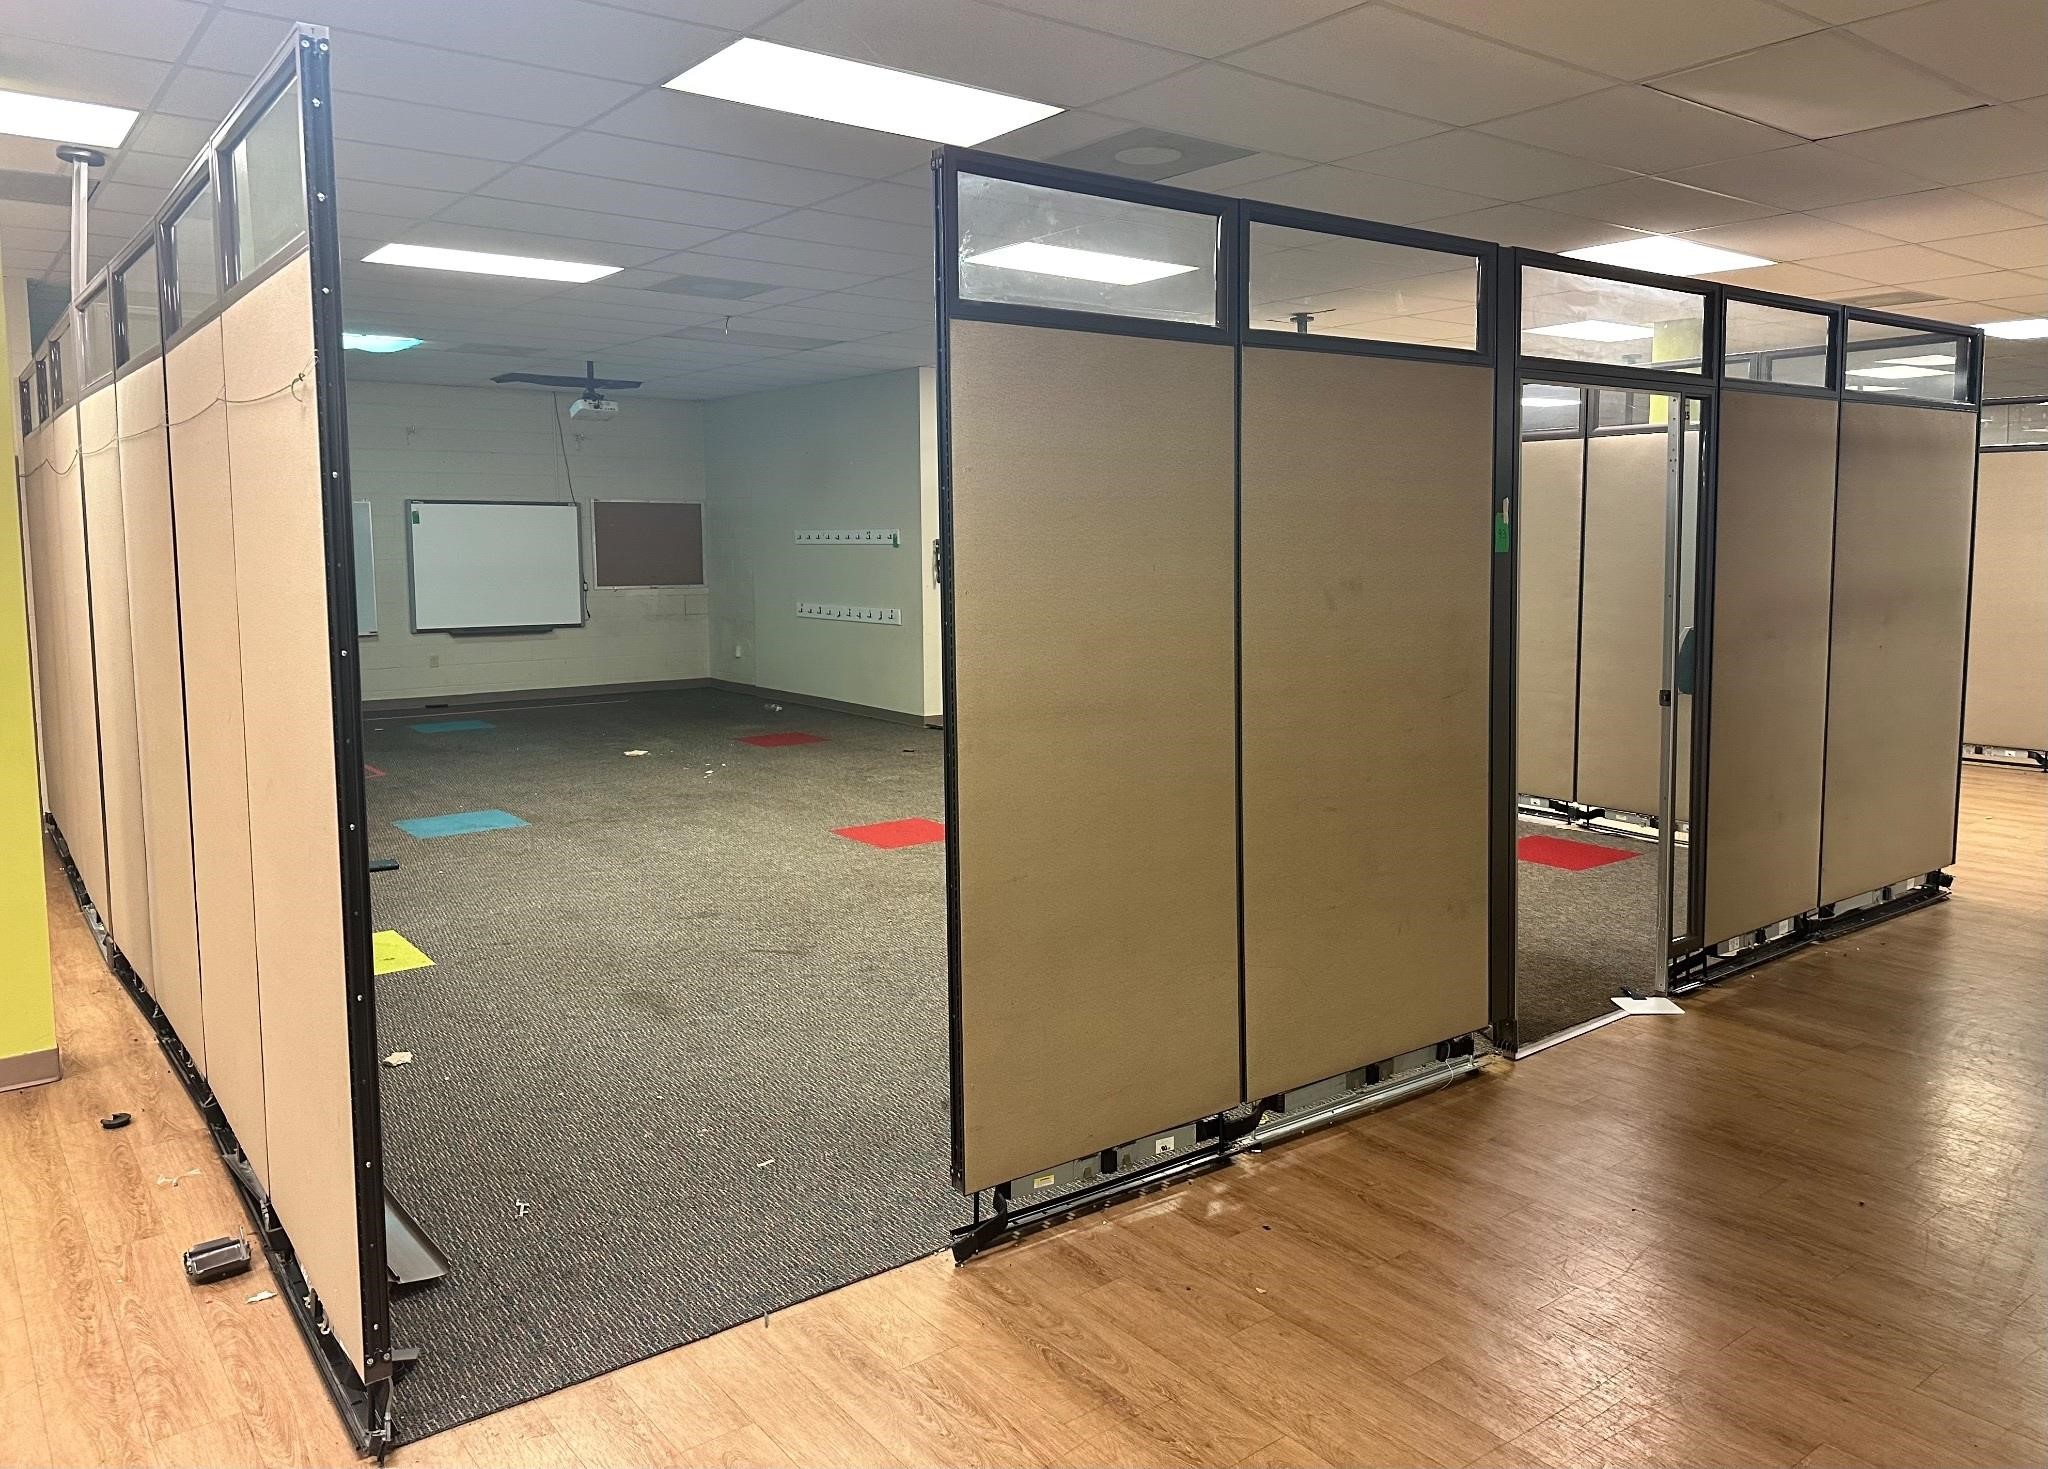 All Room Partitions In Building - Most w/Electric